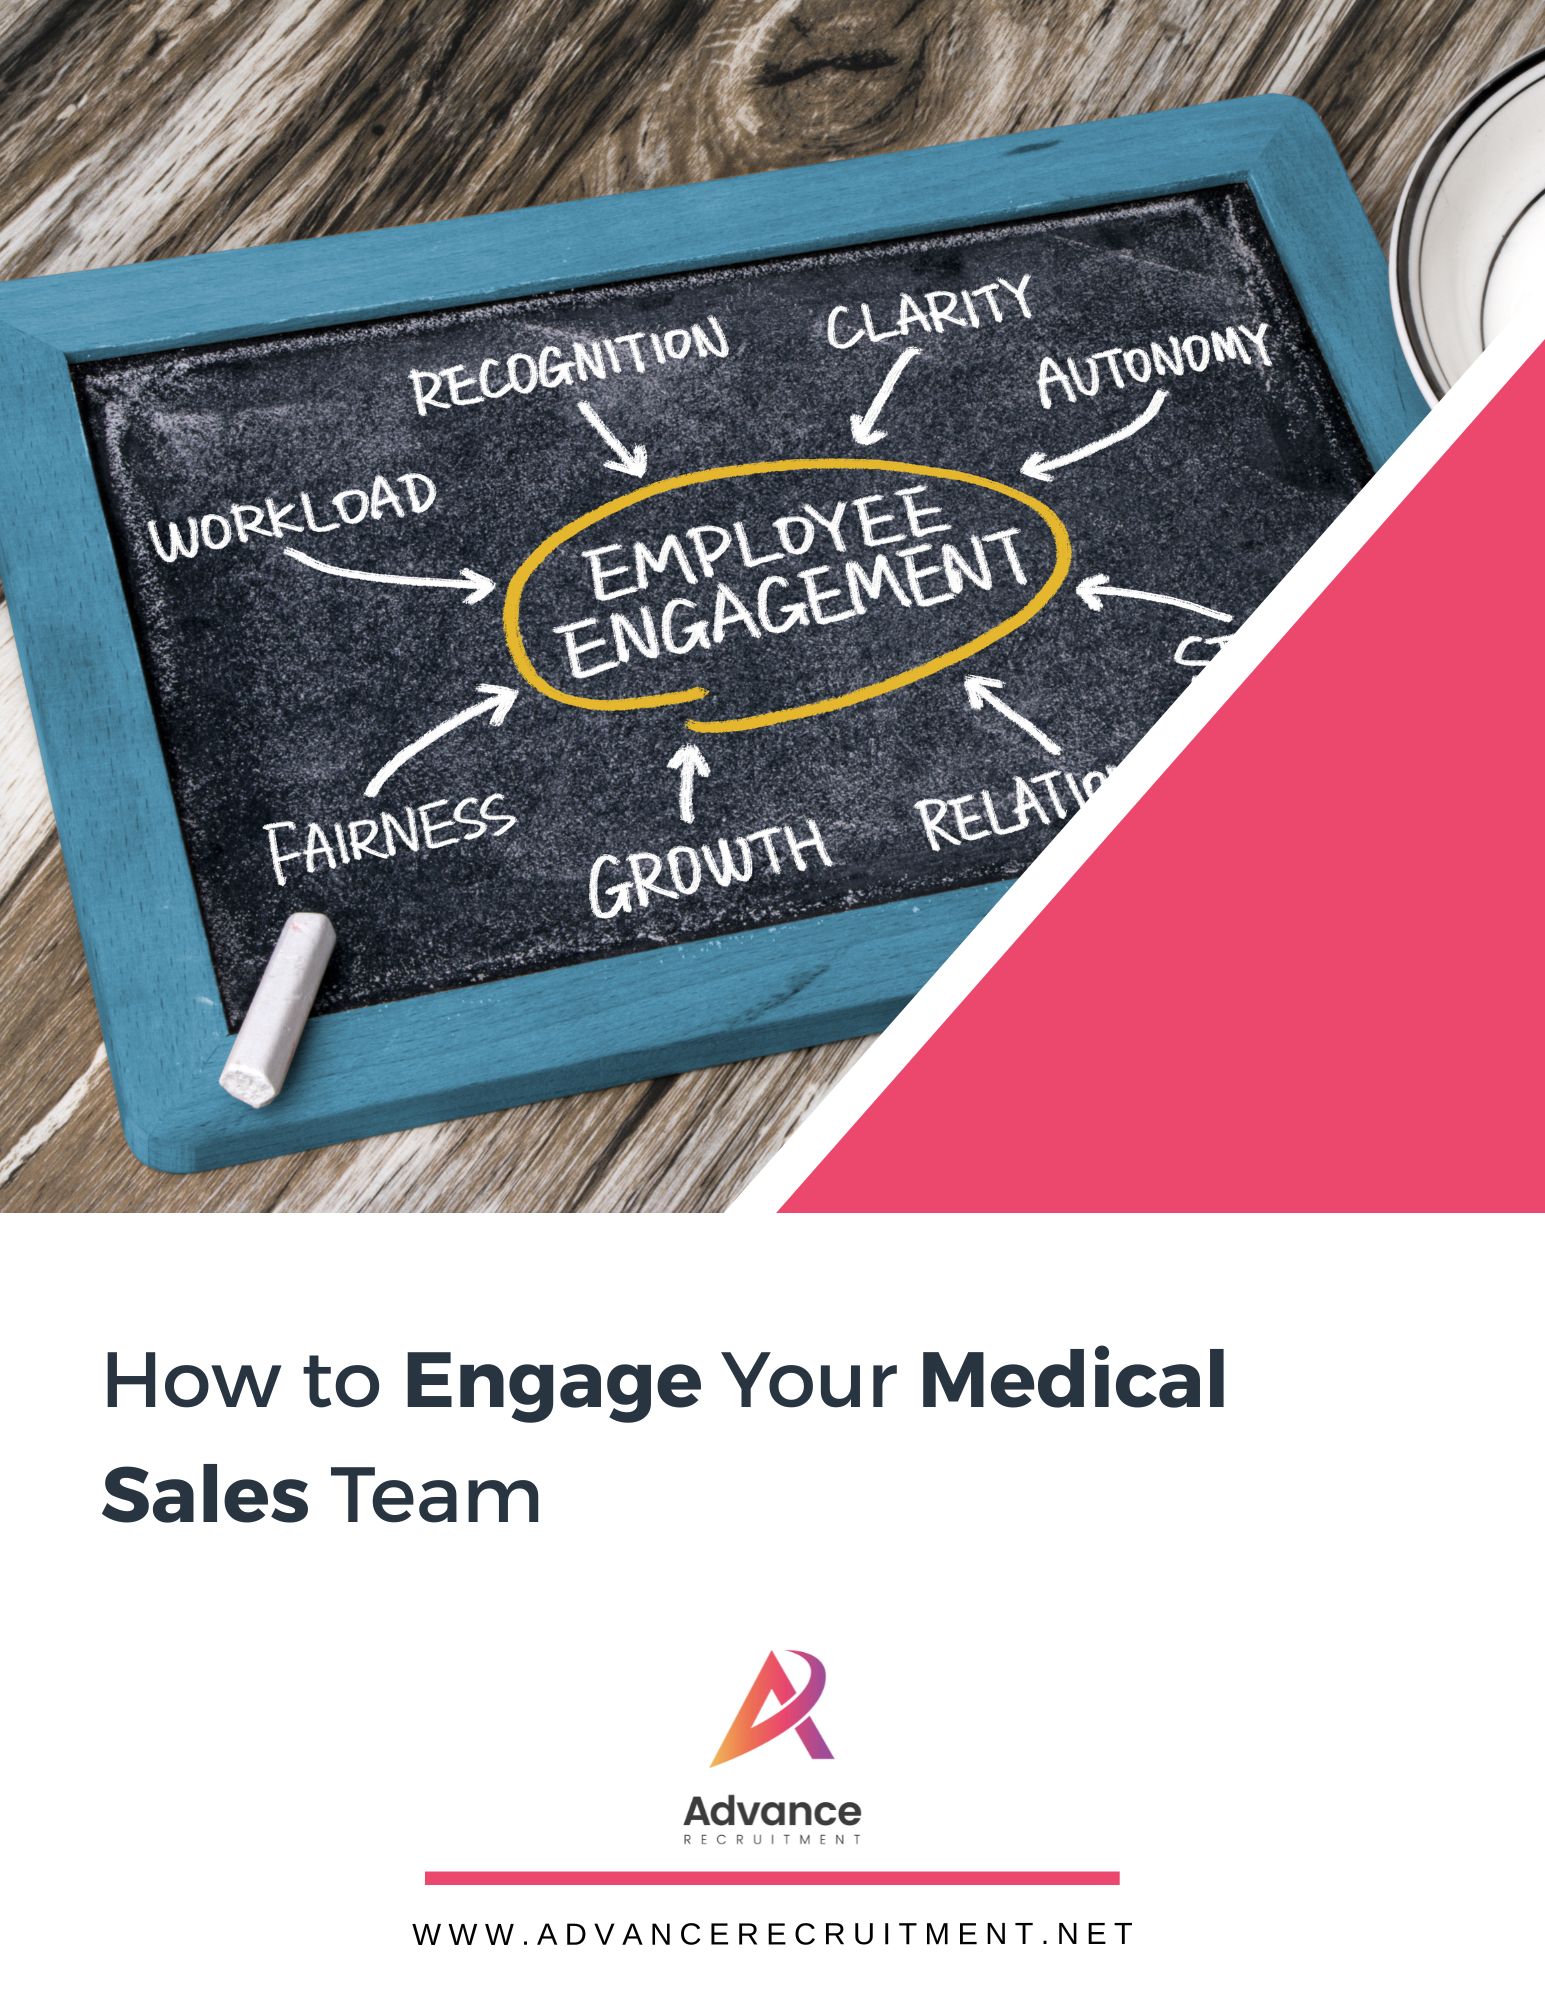 How to Engage Your Medical Sales Team